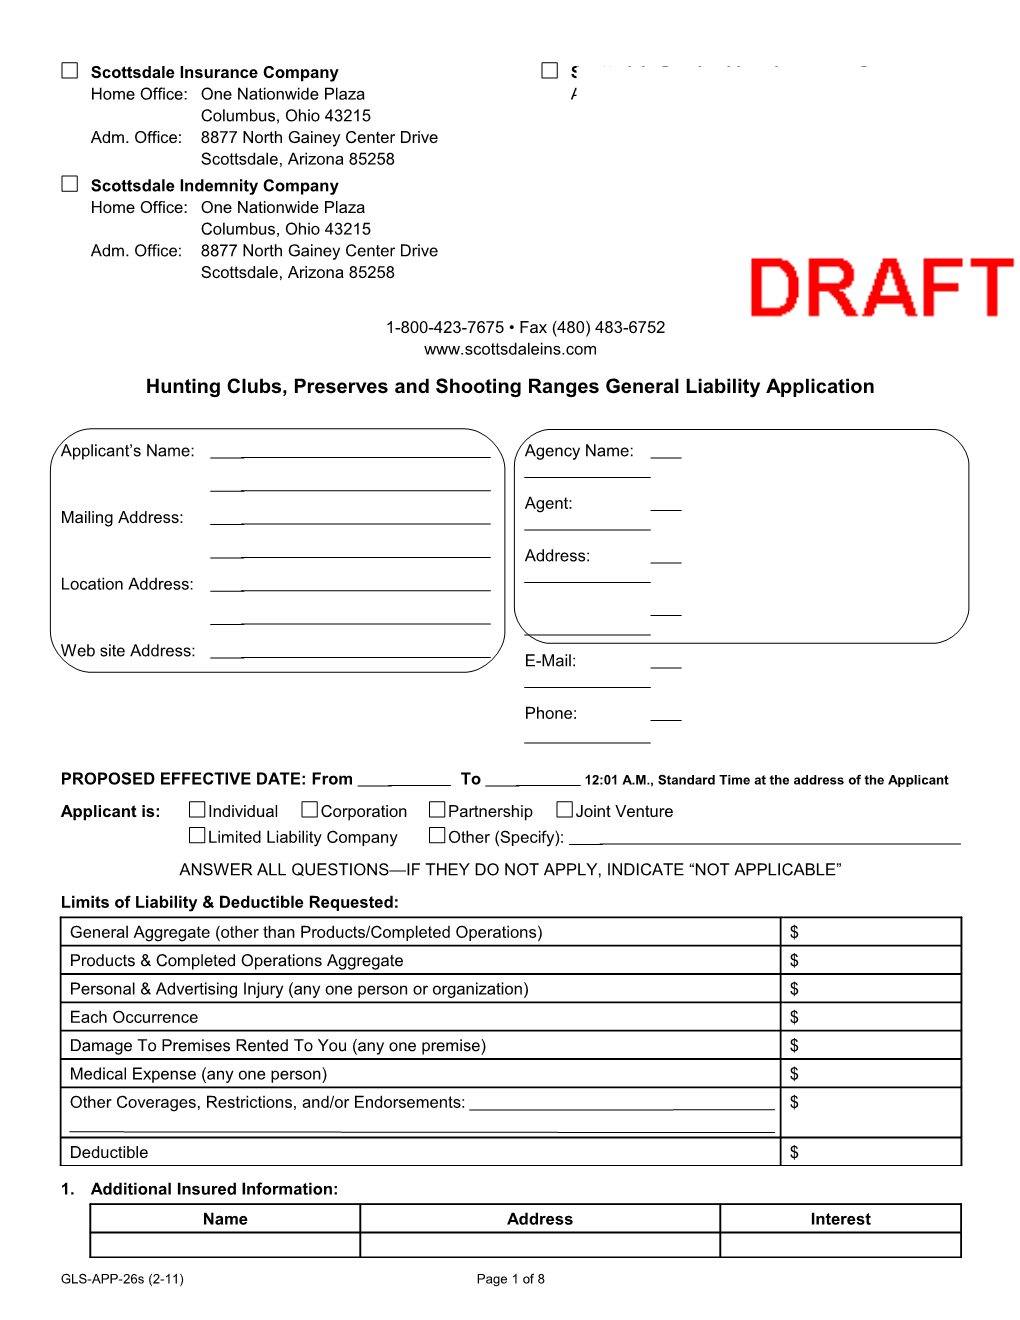 Hunting Clubs, Preserves and Shooting Ranges General Liability Application